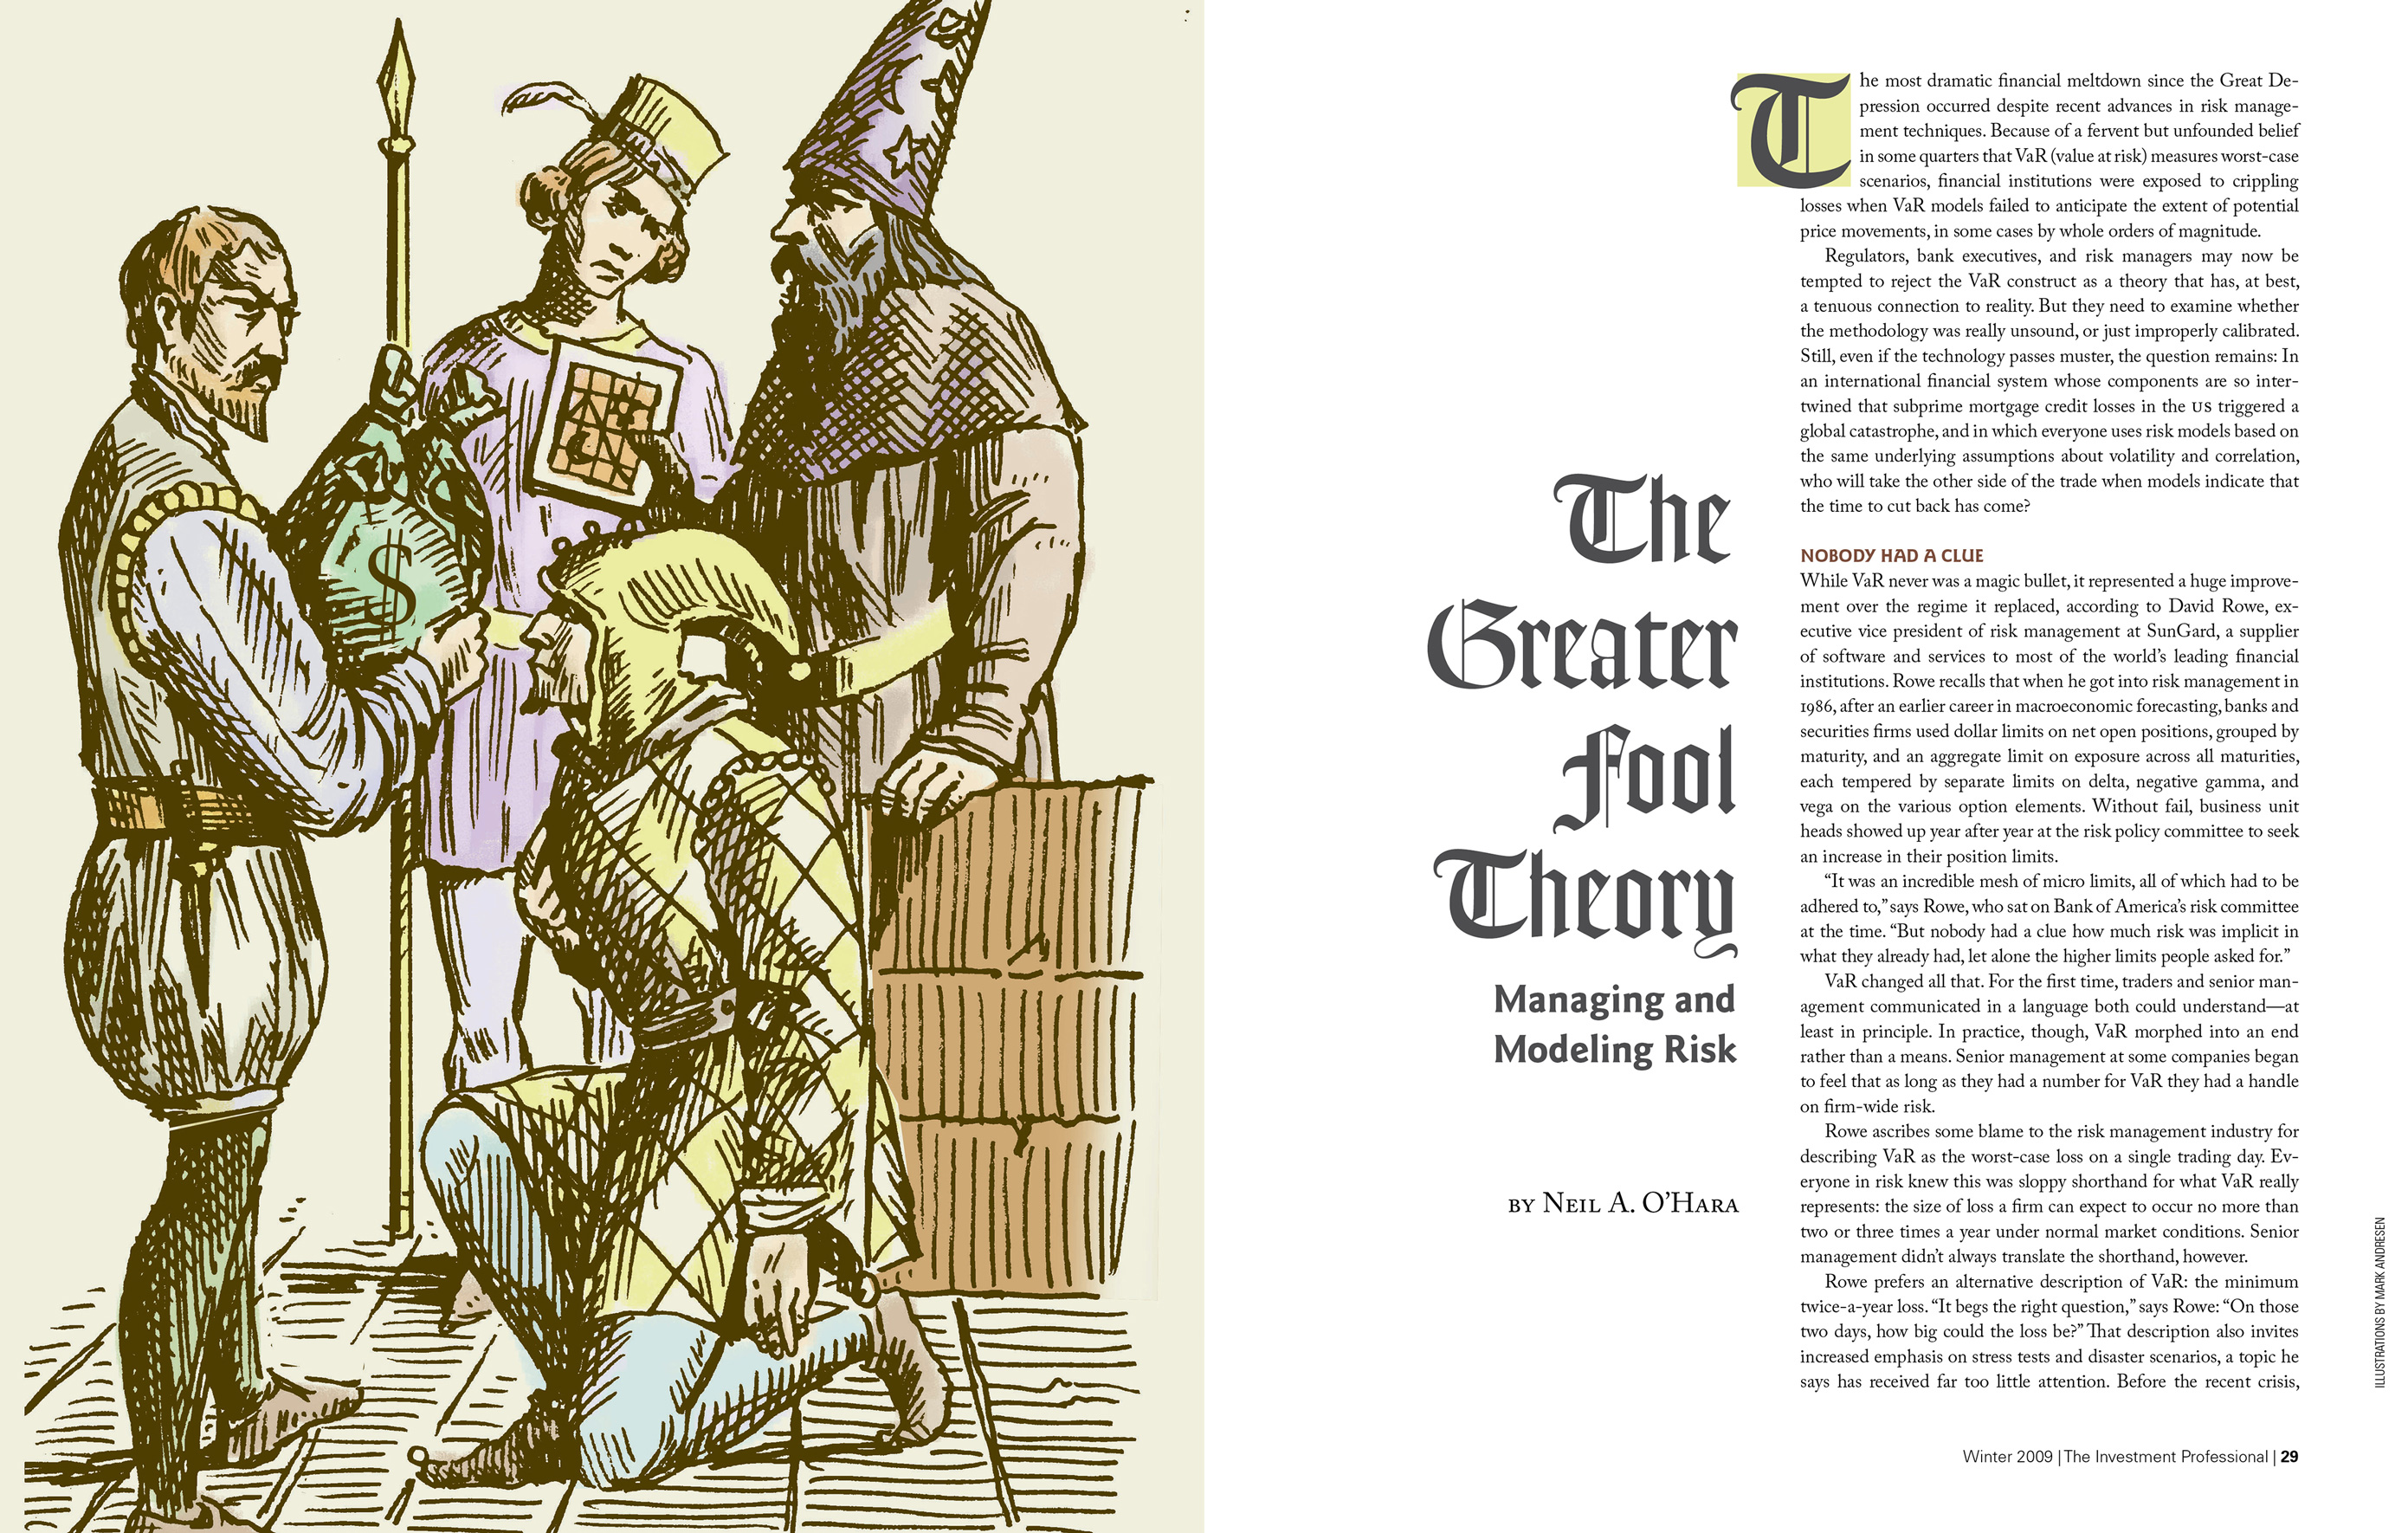 Opening spread of a feature article in The Investment Professional magazine, titled 'The Greater Fool Theory: Managing and Modeling Risk.' A full-page illustration shows a medieval jester kneeling in front of a nobleman who is holding a bag of money. A man holding a lance and wizard holding a diagram stand behind. The headline and initial cap are styled like letters in a medieval manuscript.